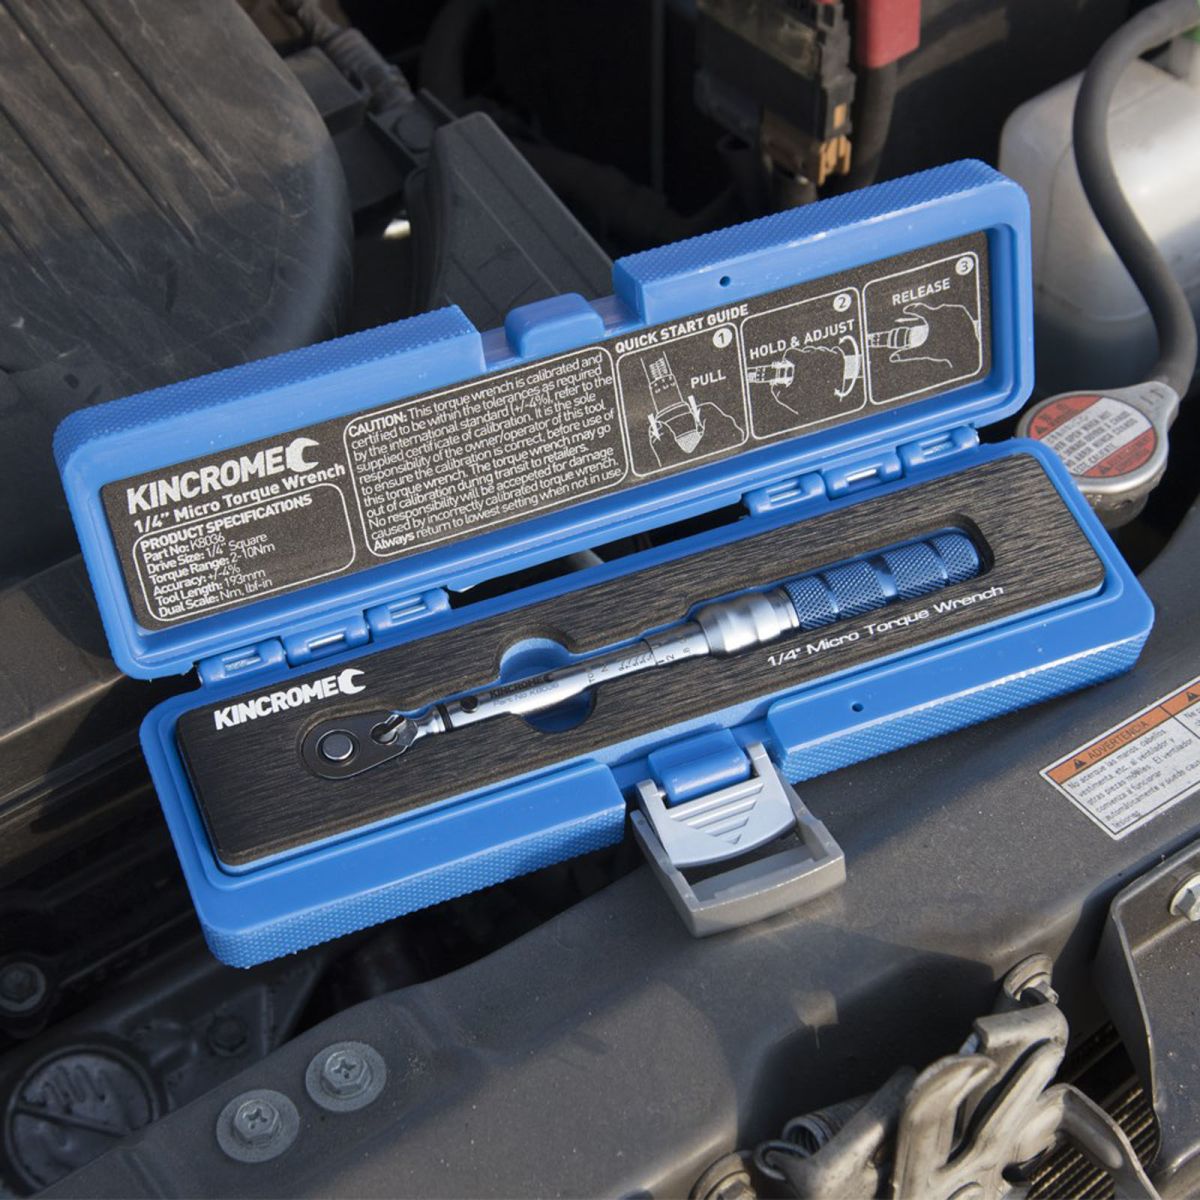 How to use a Kincrome torque wrench